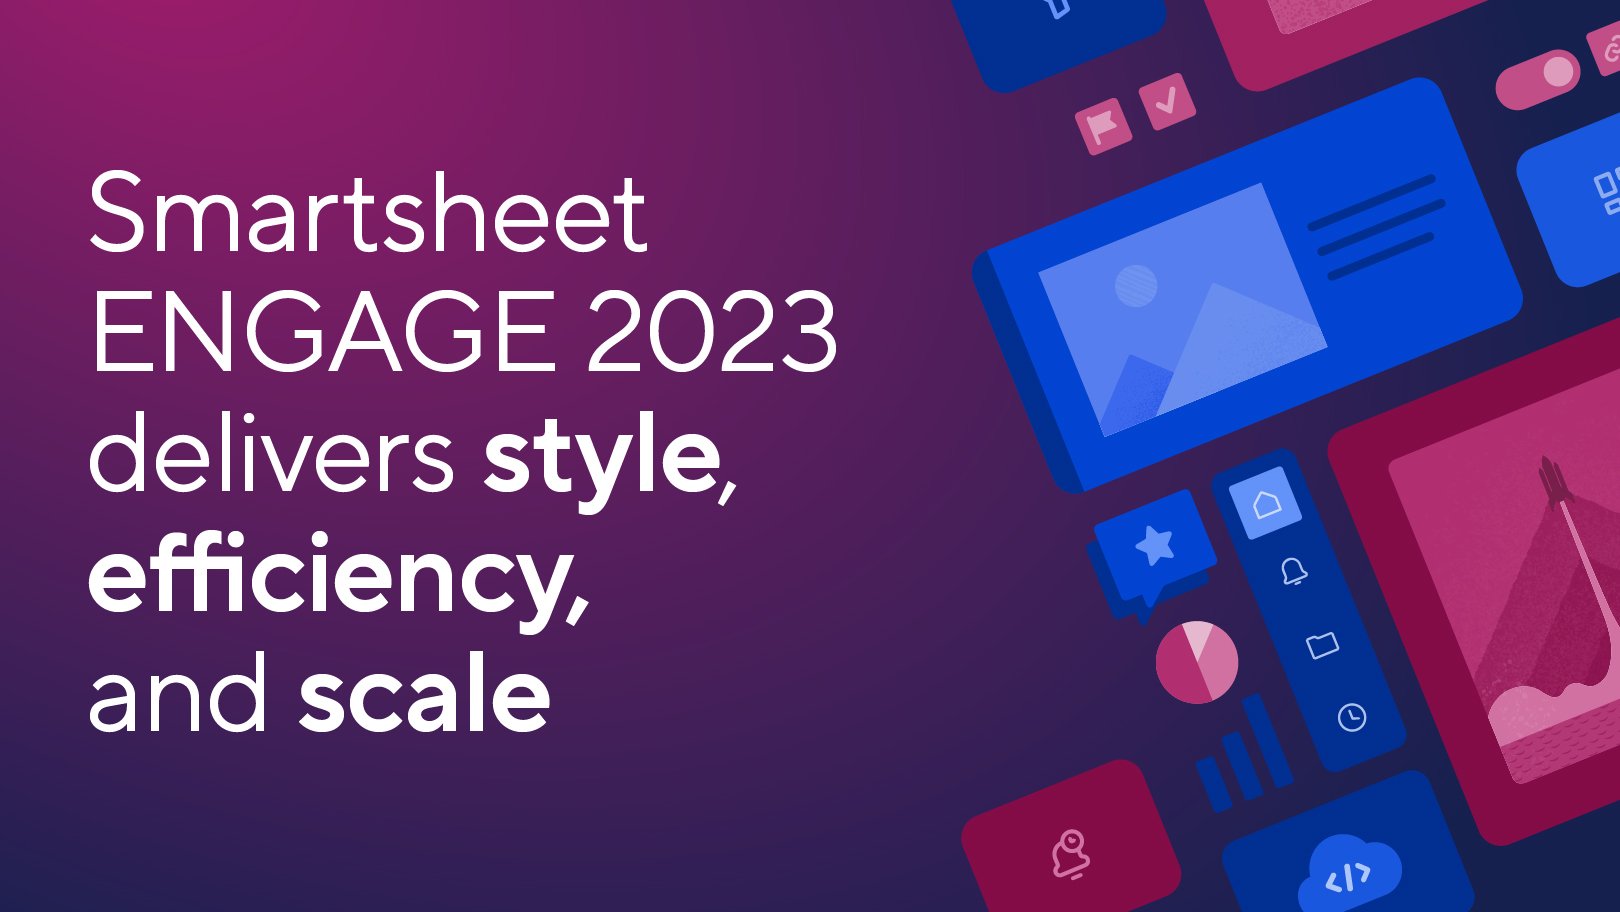 ENGAGE 2023 delivers style, efficiency, and scale